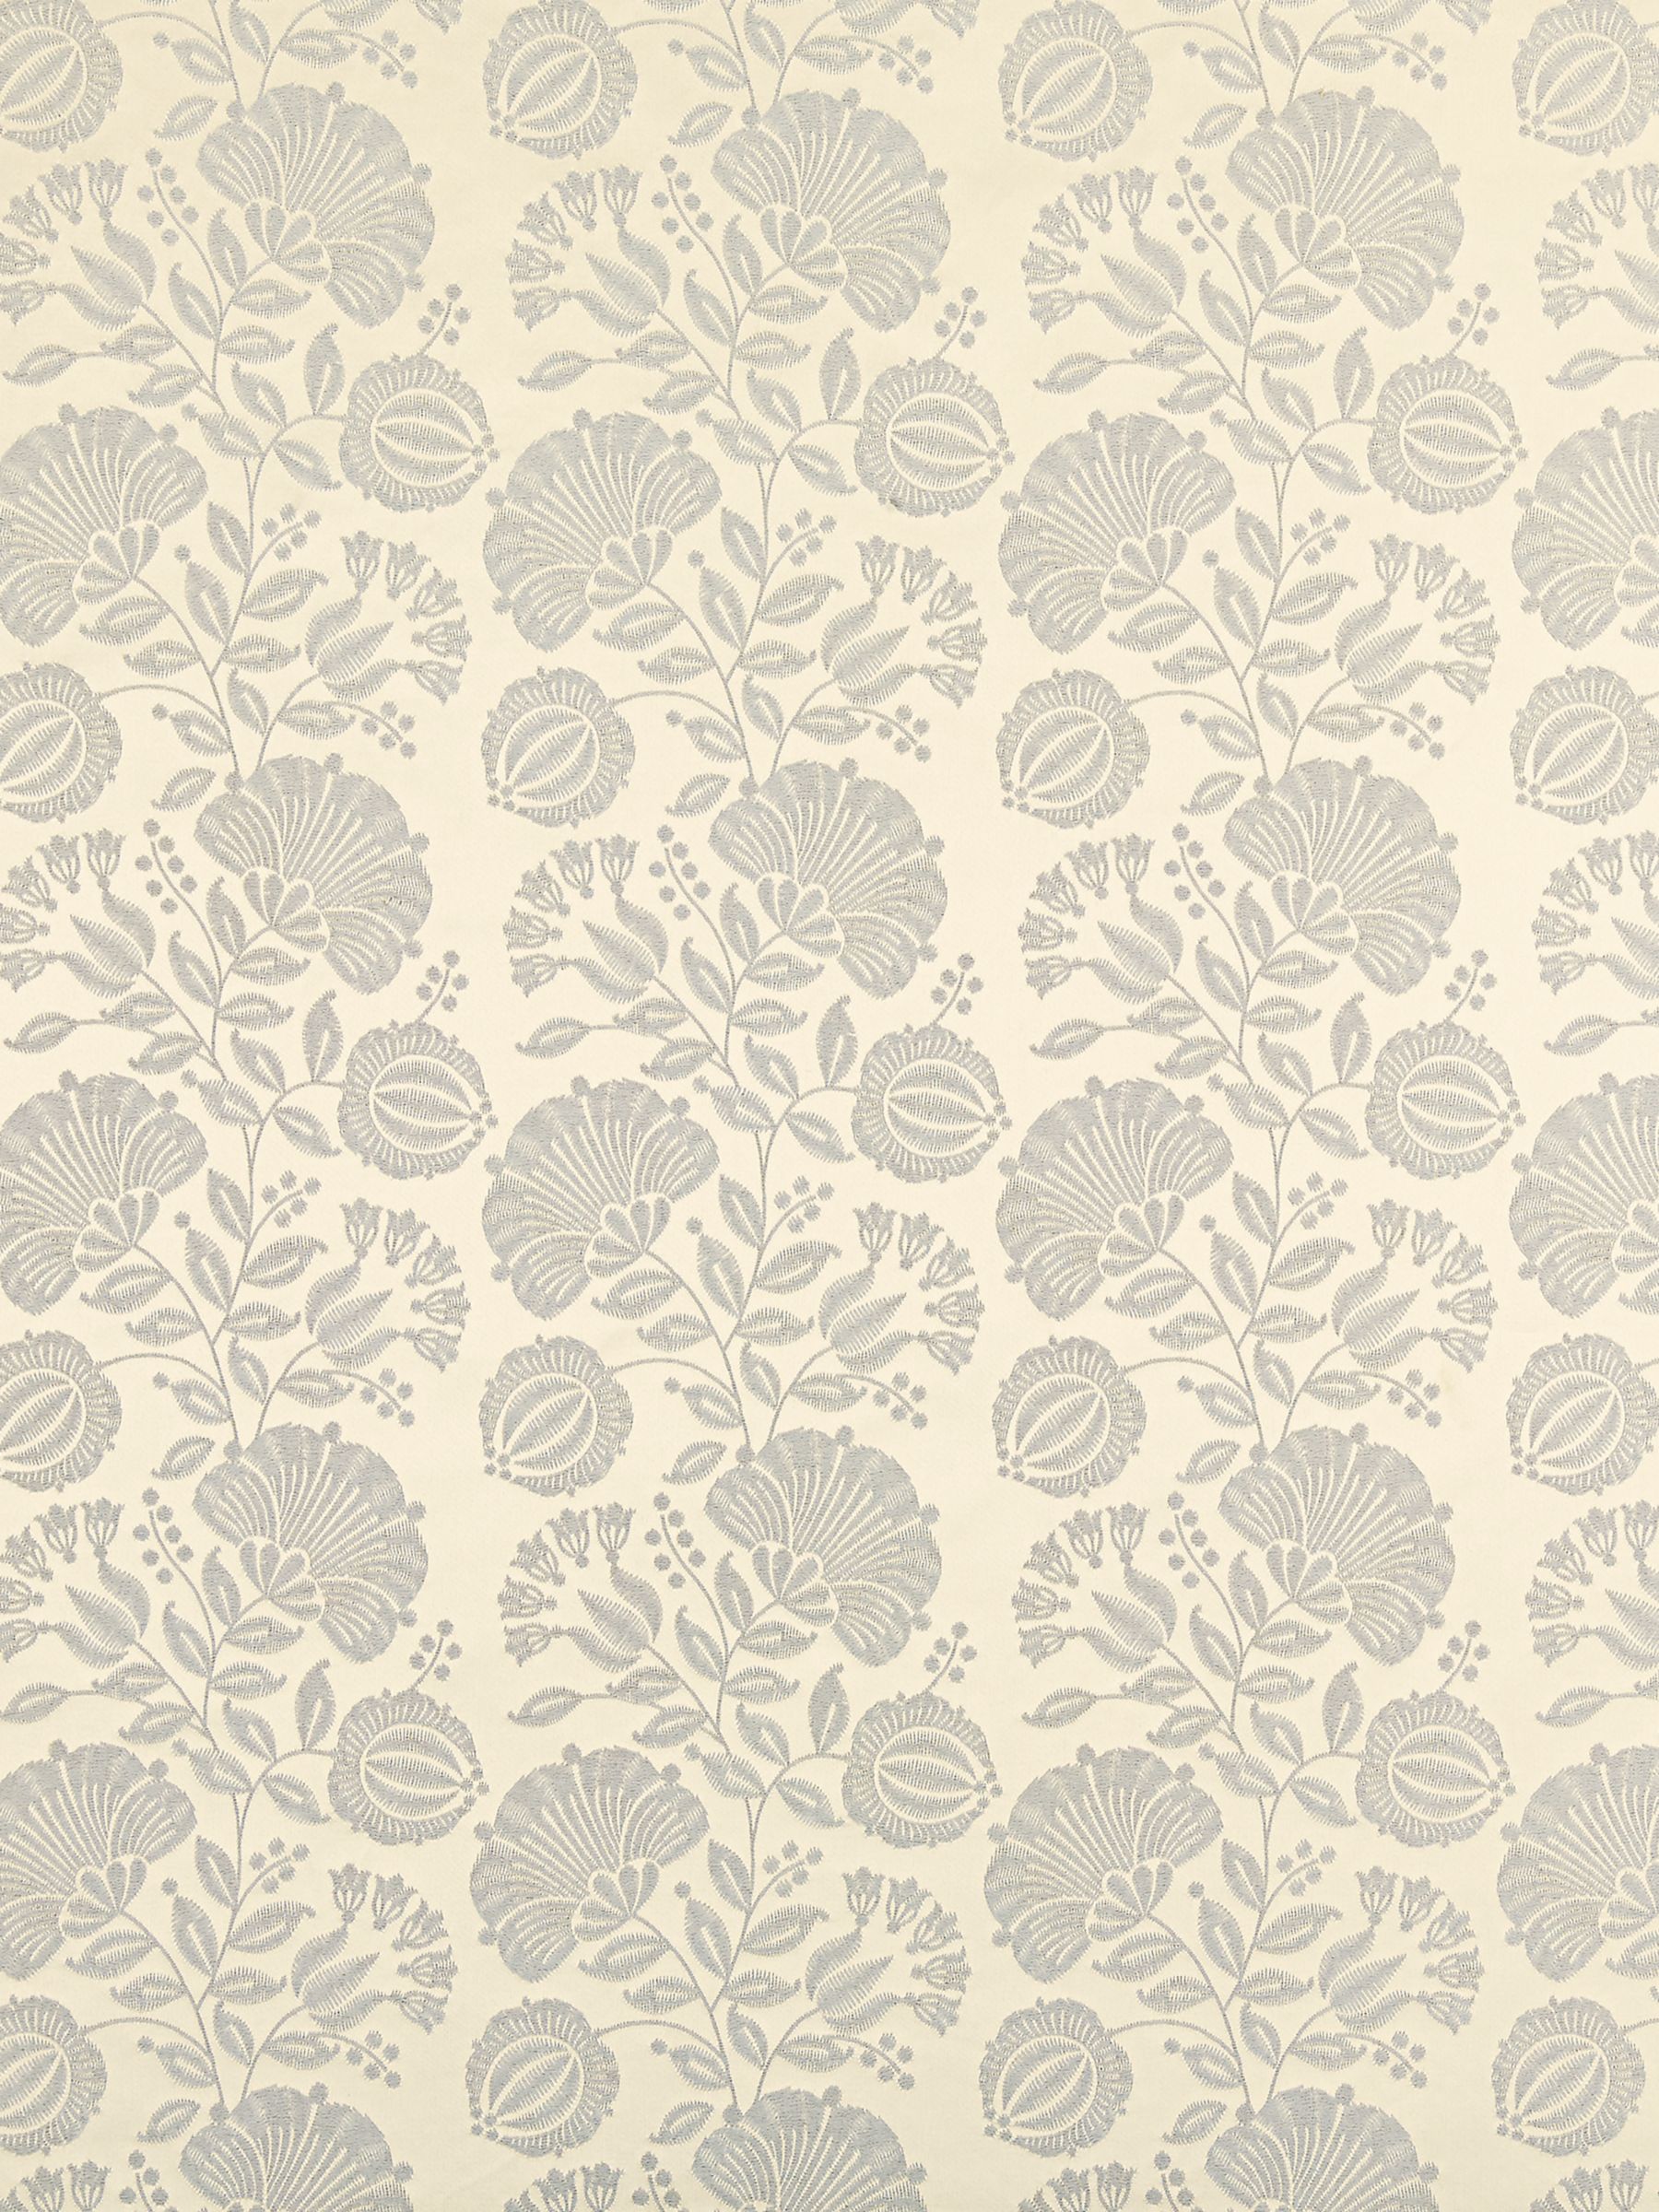 Genevieve Bennett for John Lewis & Partners Persian Thistle Furnishing Fabric, Silver